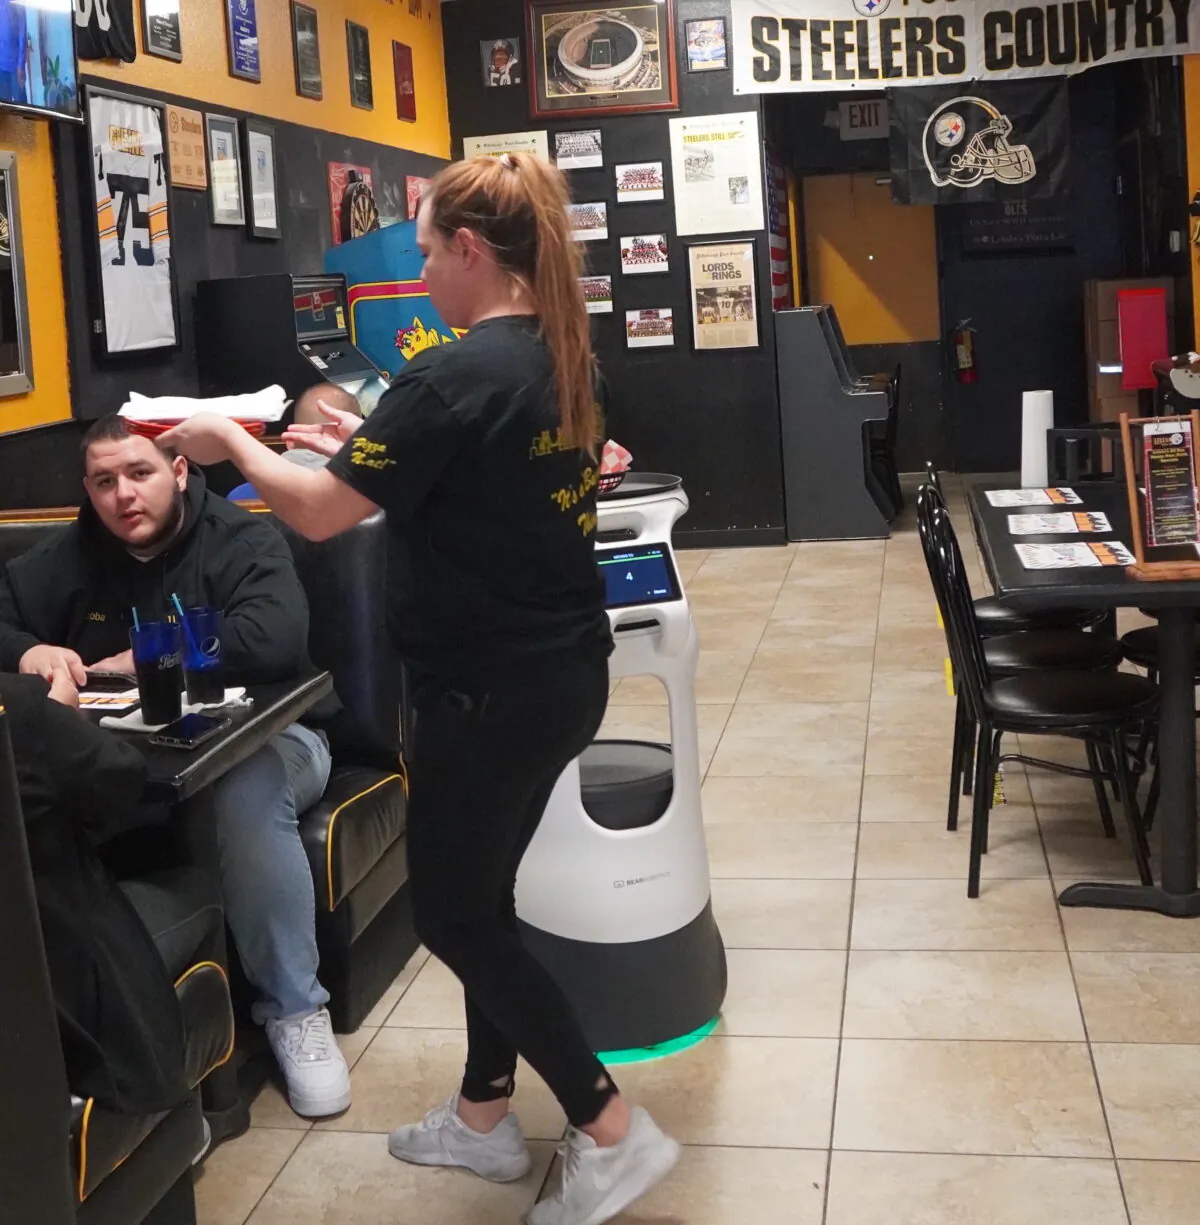 Meghan Wollerman takes food from Champ the robot and serves patrons Lelulo's Pizzara Cape Coral, Fla. Jan. 18, 2022. (Photo: Jann Falkenstern, The Epoch Times)